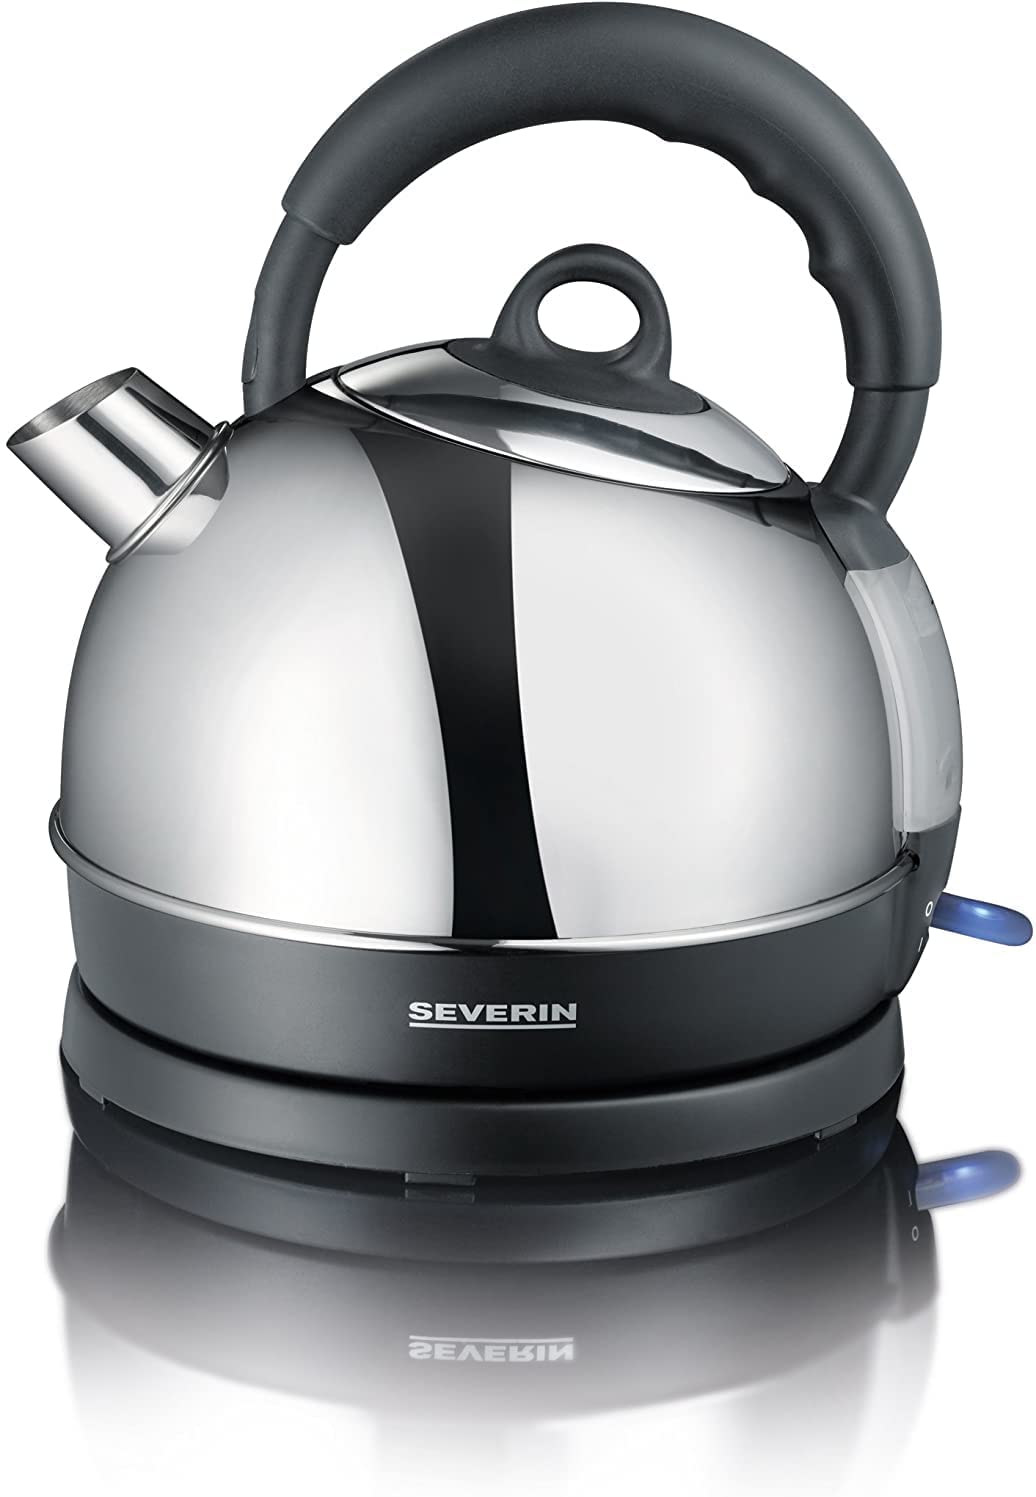 Severin WK 3349 electrical kettle - electric kettles